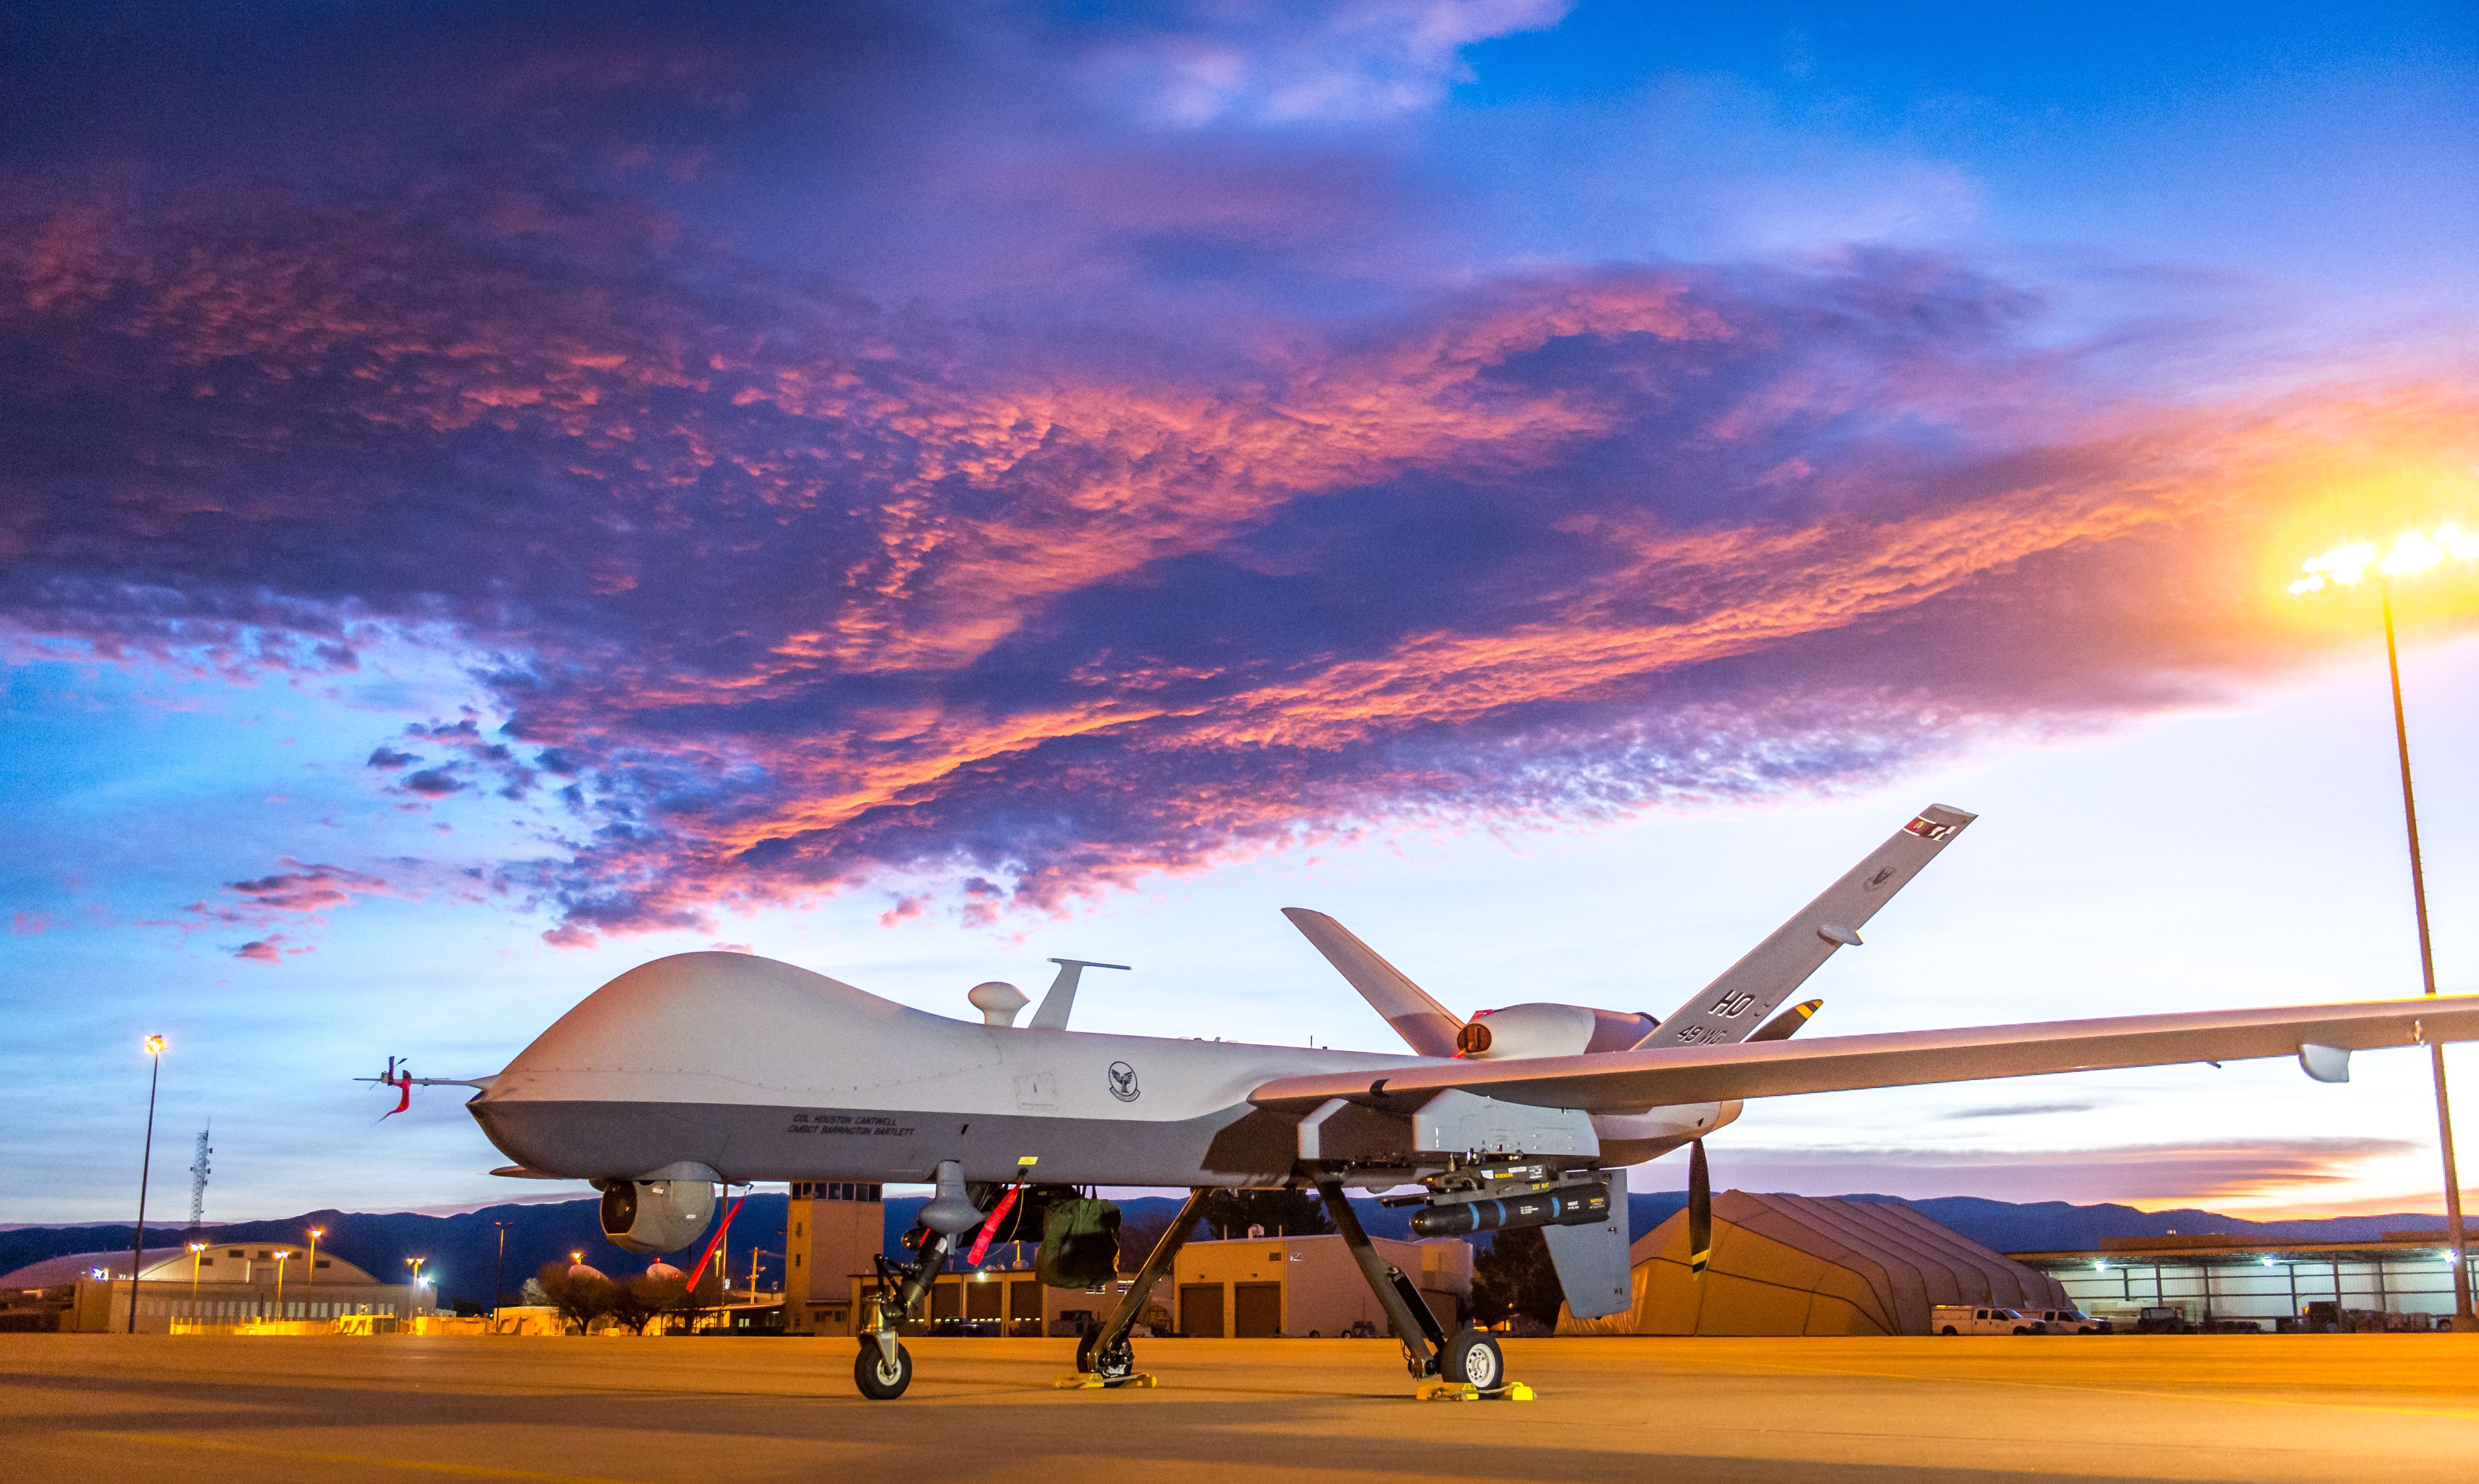 The sun rises over an MQ-9 Reaper remotely piloted aircraft at Holloman Air Force Base, N.M., Dec. 16, 2016. The 49th Aircraft Maintenance Squadron supports the 6th Reconnaissance Squadron 